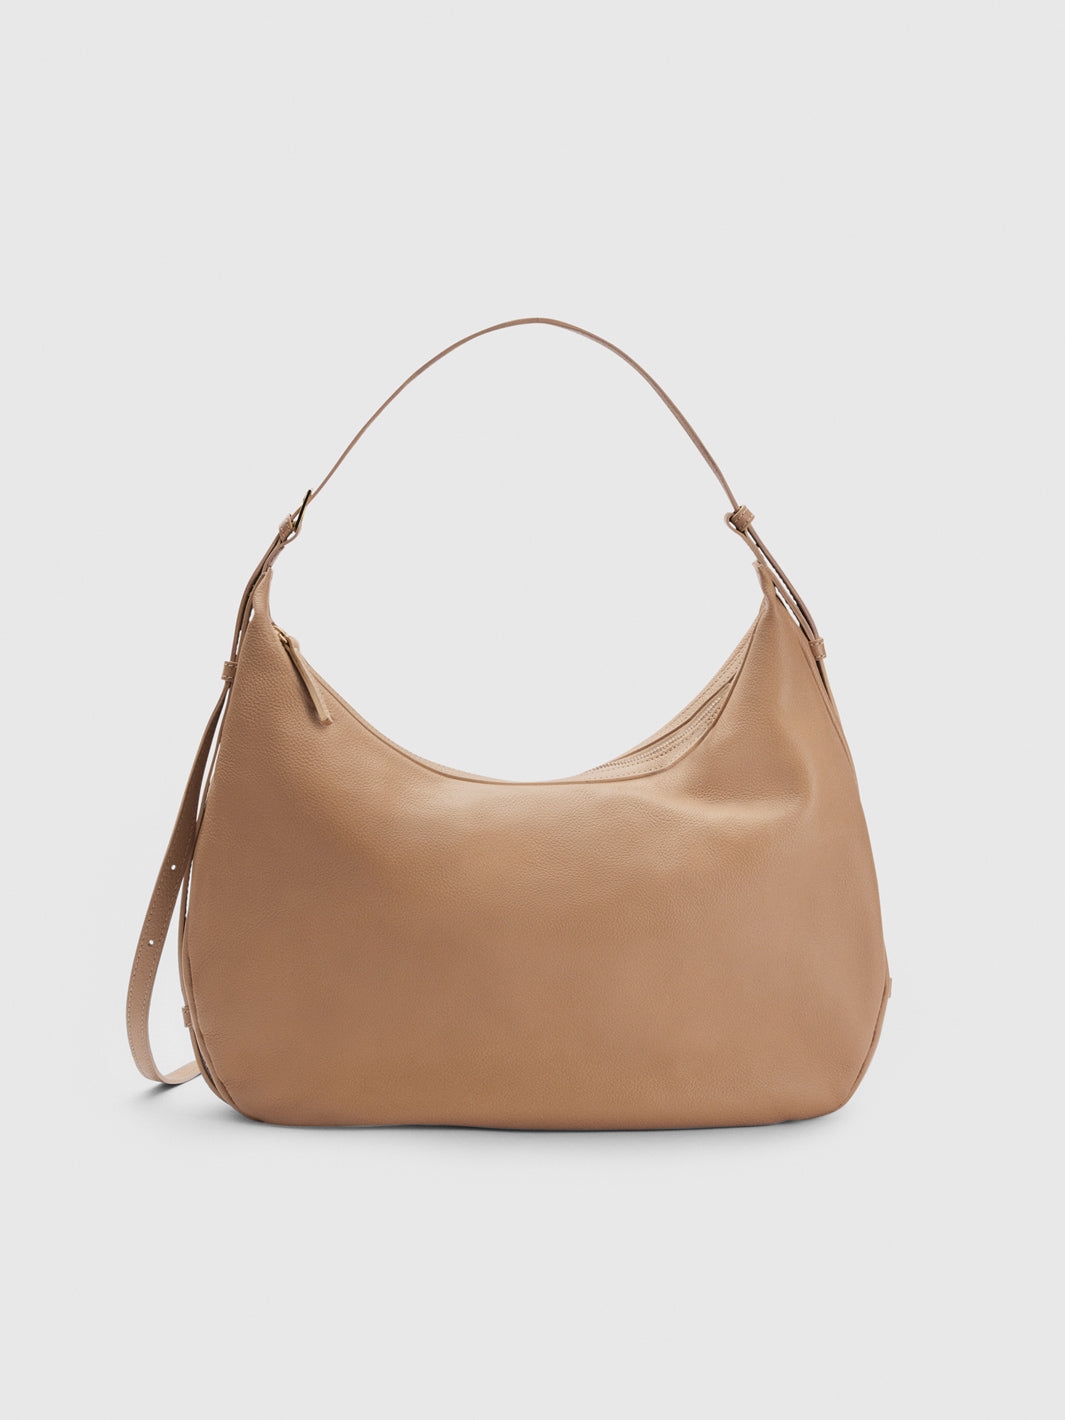 Potenza Nocciola/Contrast Stitch Grained Leather Large hobo bag